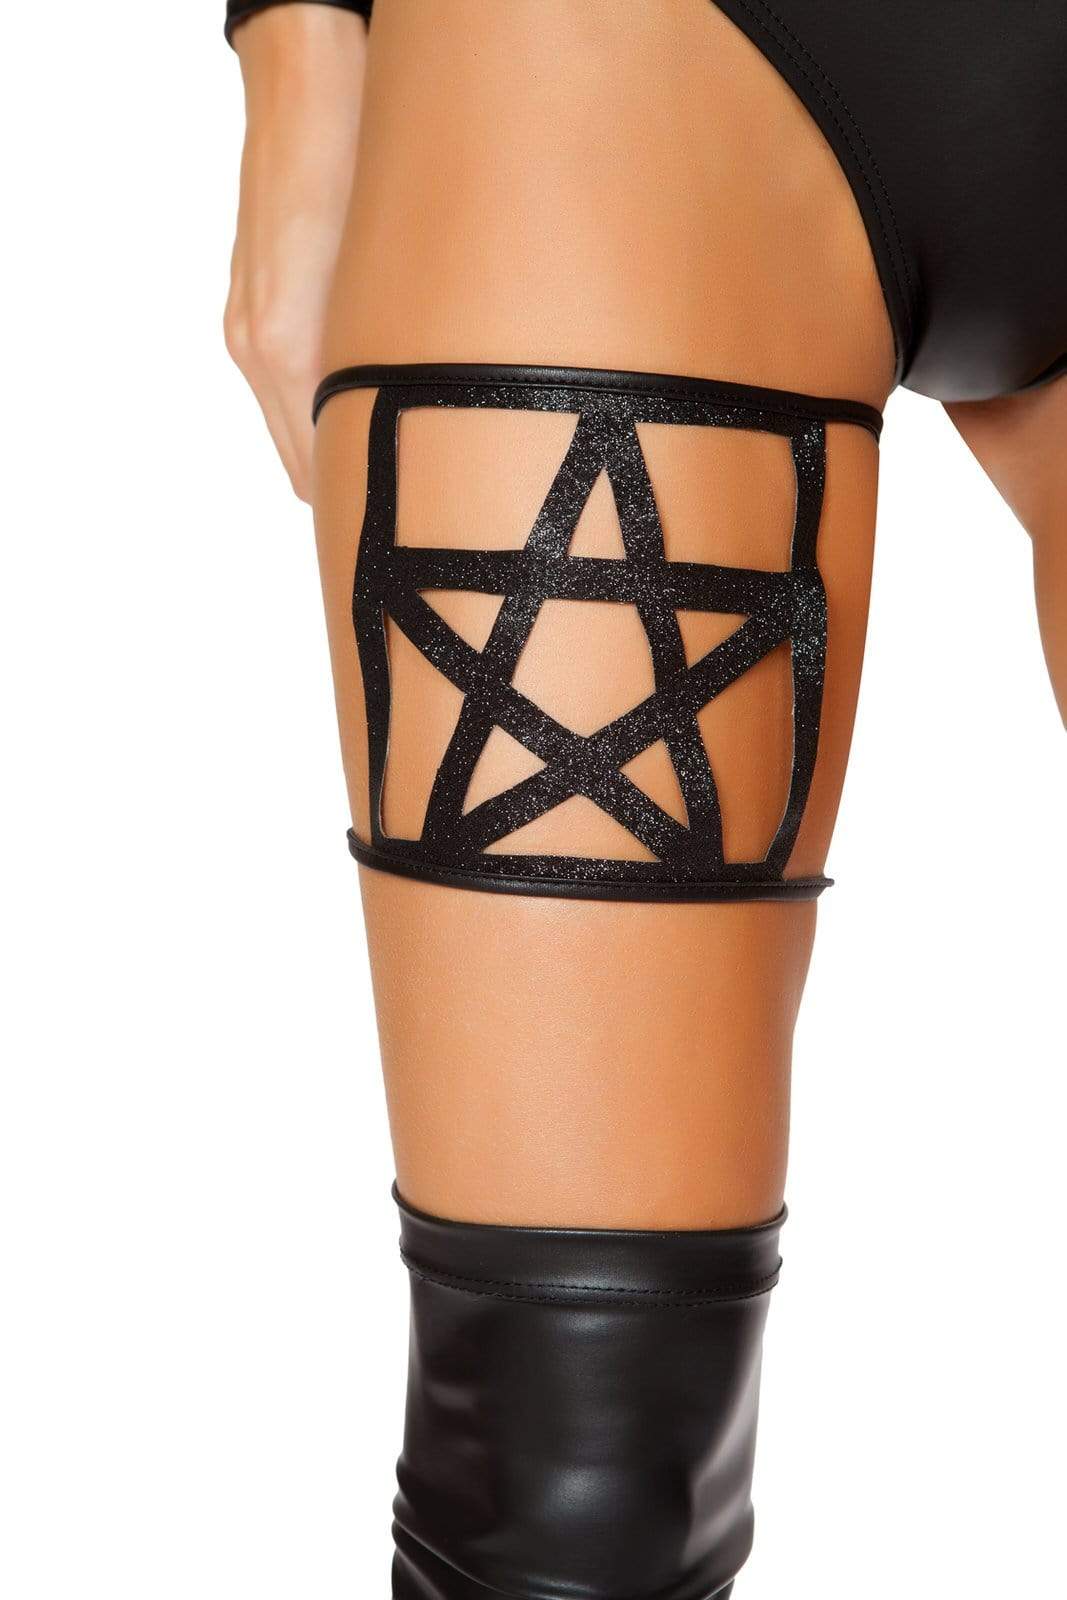 Roma ONE SIZE GLITTERING PENTAGRAM STAR THIGH STRAP SHC-4795-R Apparel &amp; Accessories &gt; Costumes &amp; Accessories &gt; Costumes